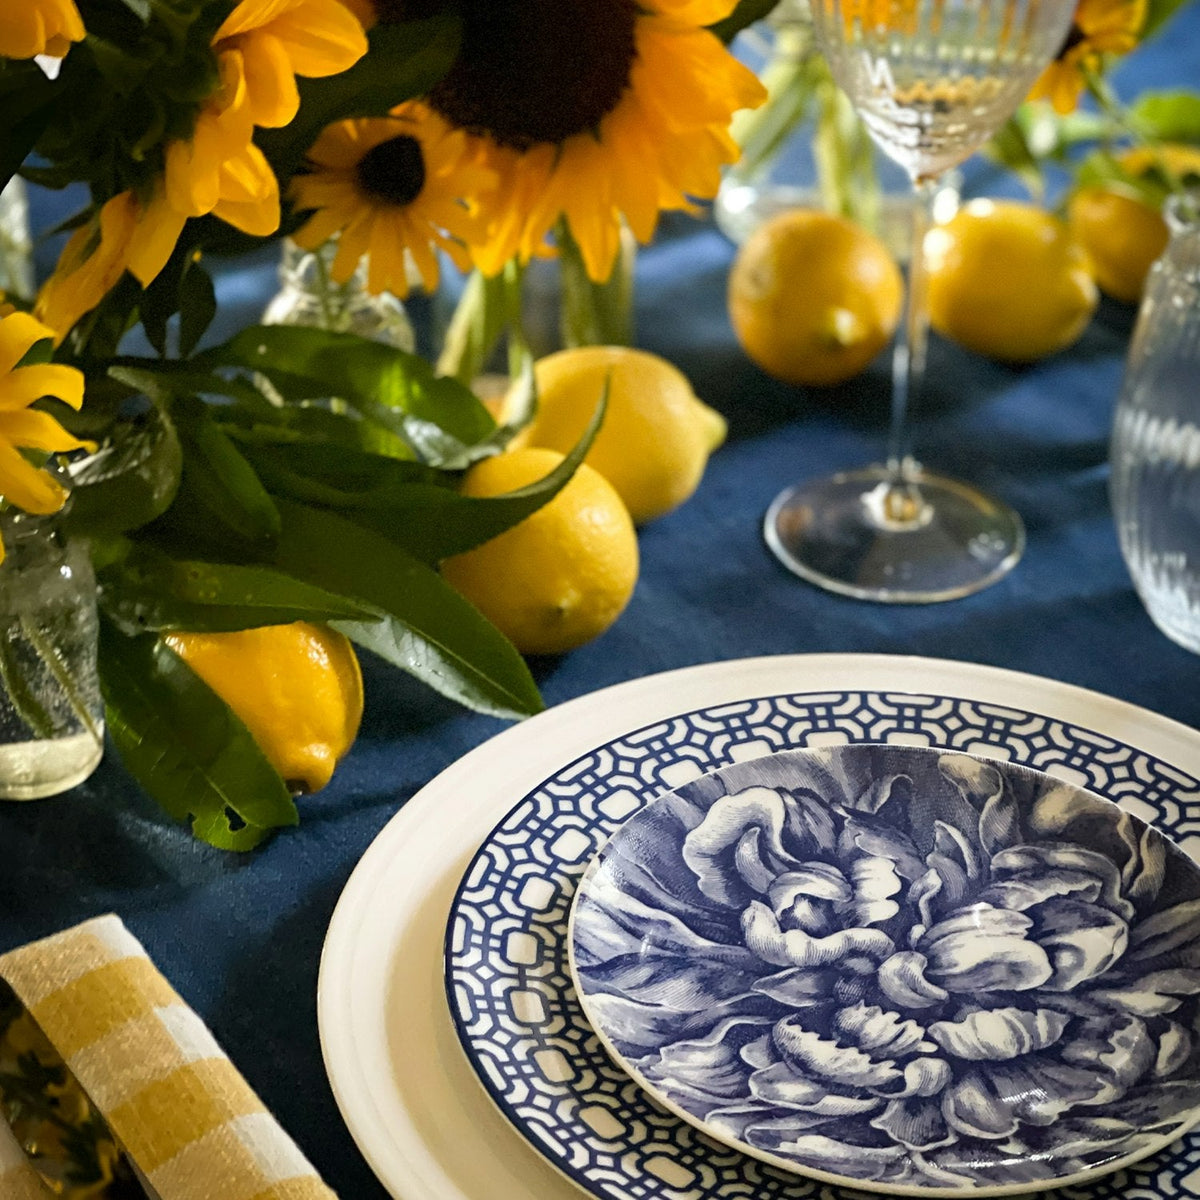 A high-fired porcelain table setting with sunflowers and lemons, featuring Caskata Artisanal Home's Peony Canapé Plates.